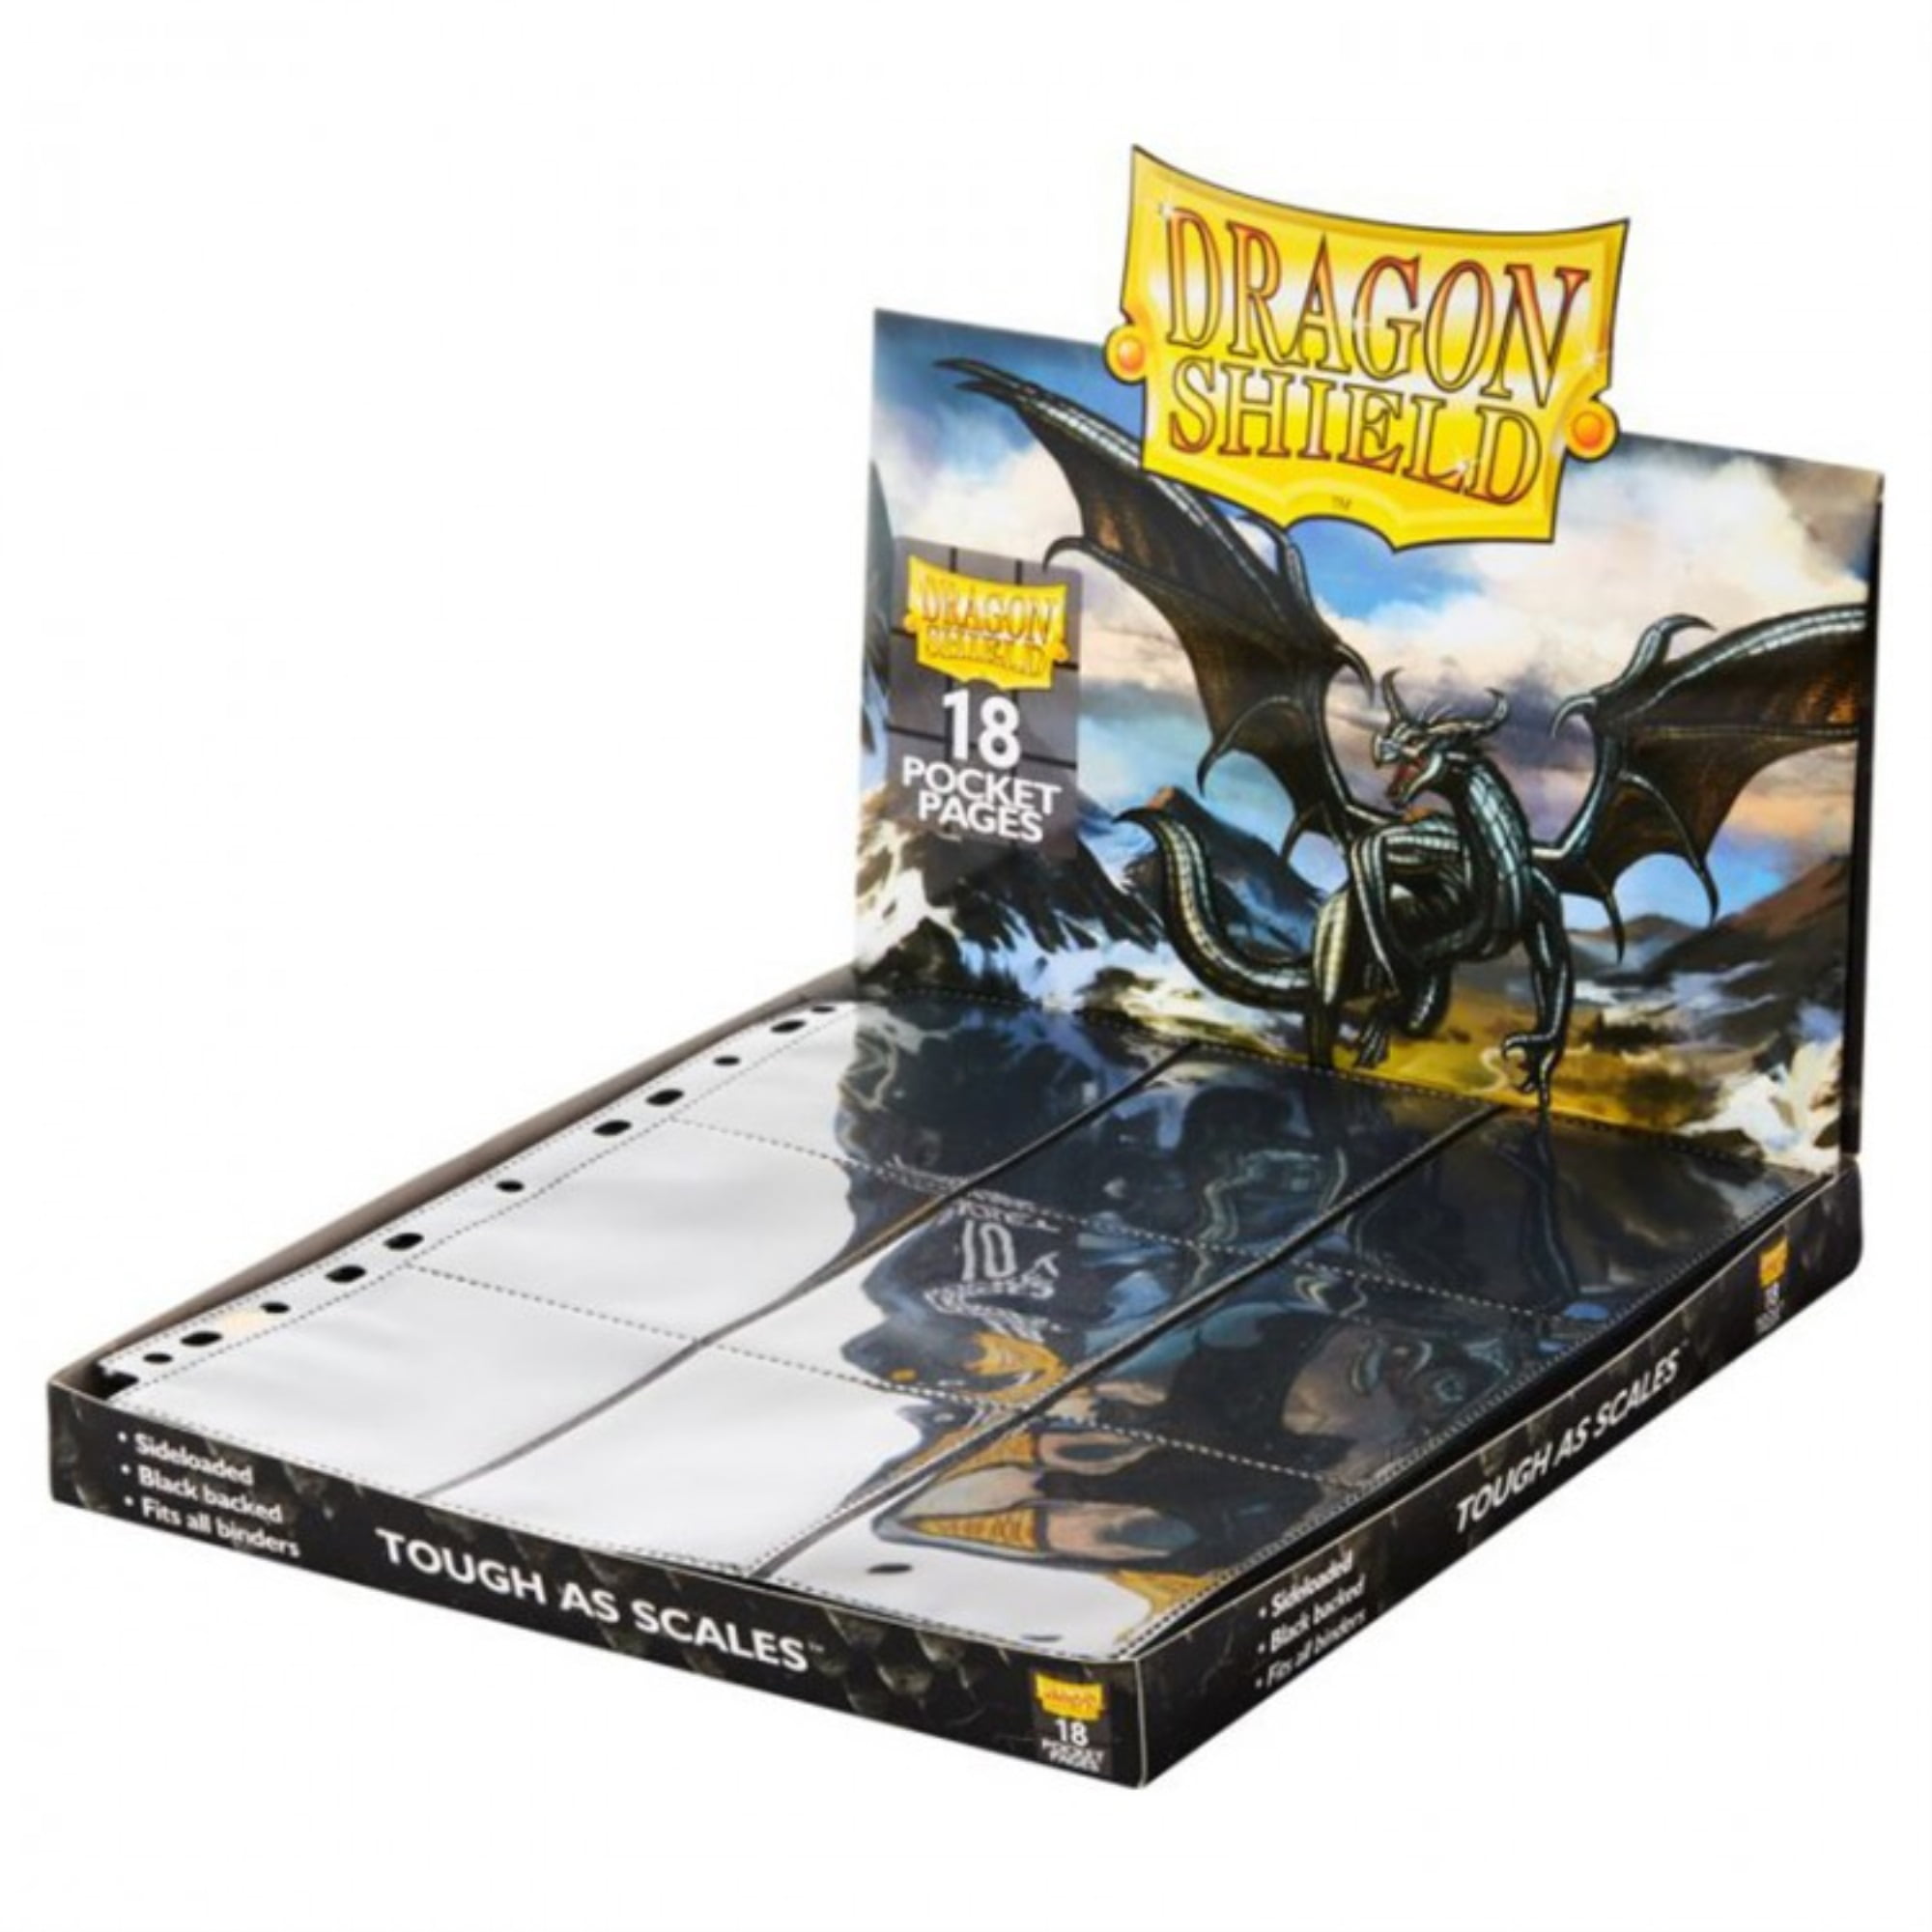 Atm10301 Dragon Shield Pages Card Games - Pack Of 18, 50 Count